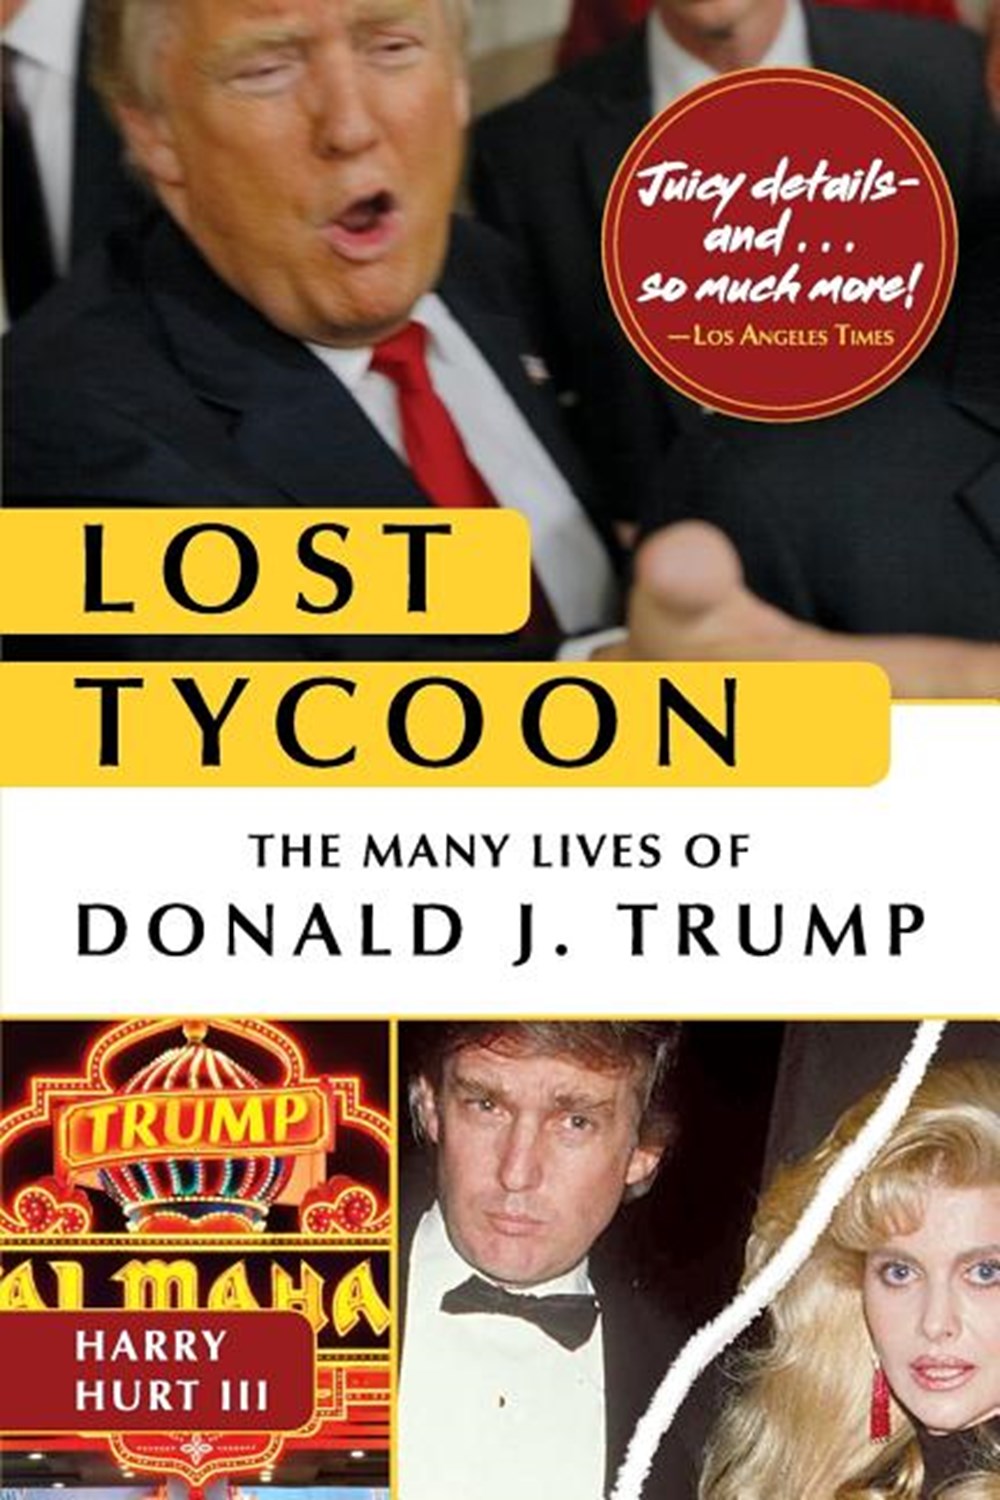 Lost Tycoon The Many Lives of Donald J. Trump